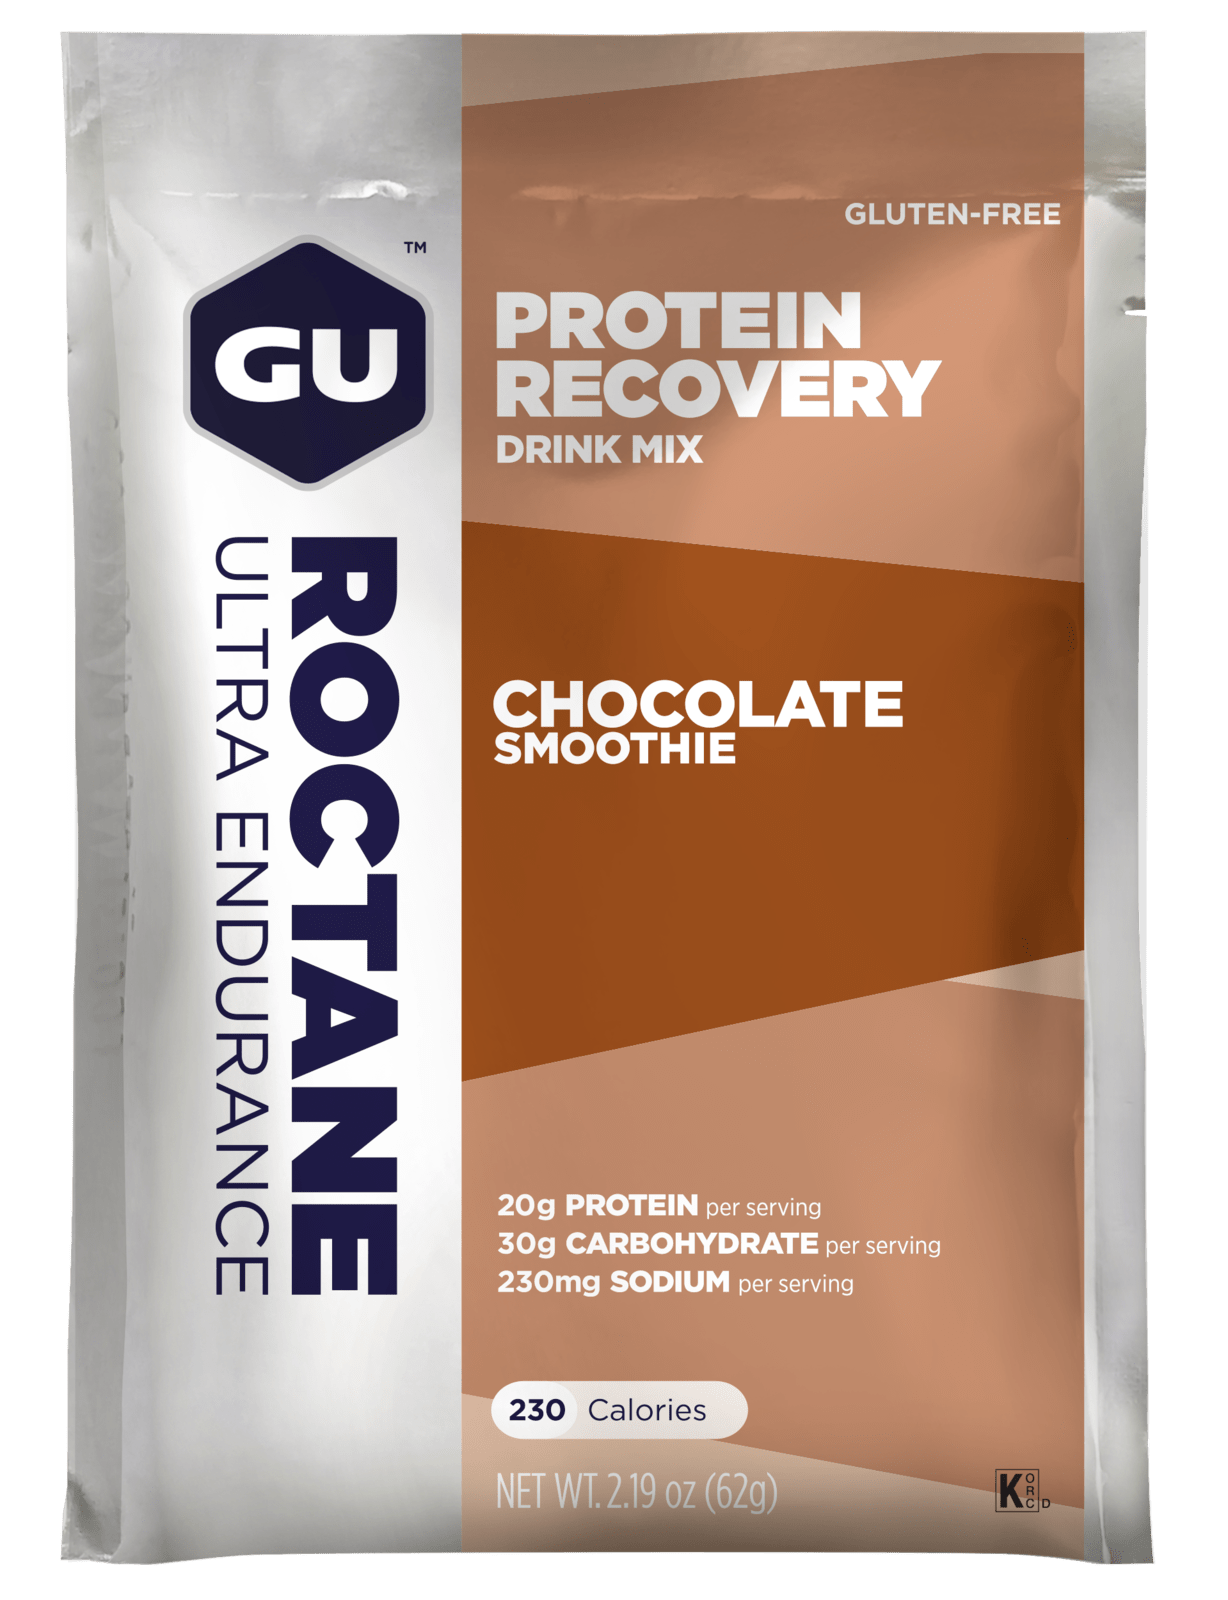 GU Energy Proteindrik Roctane Recovery Chocolate Smoothie (65g)